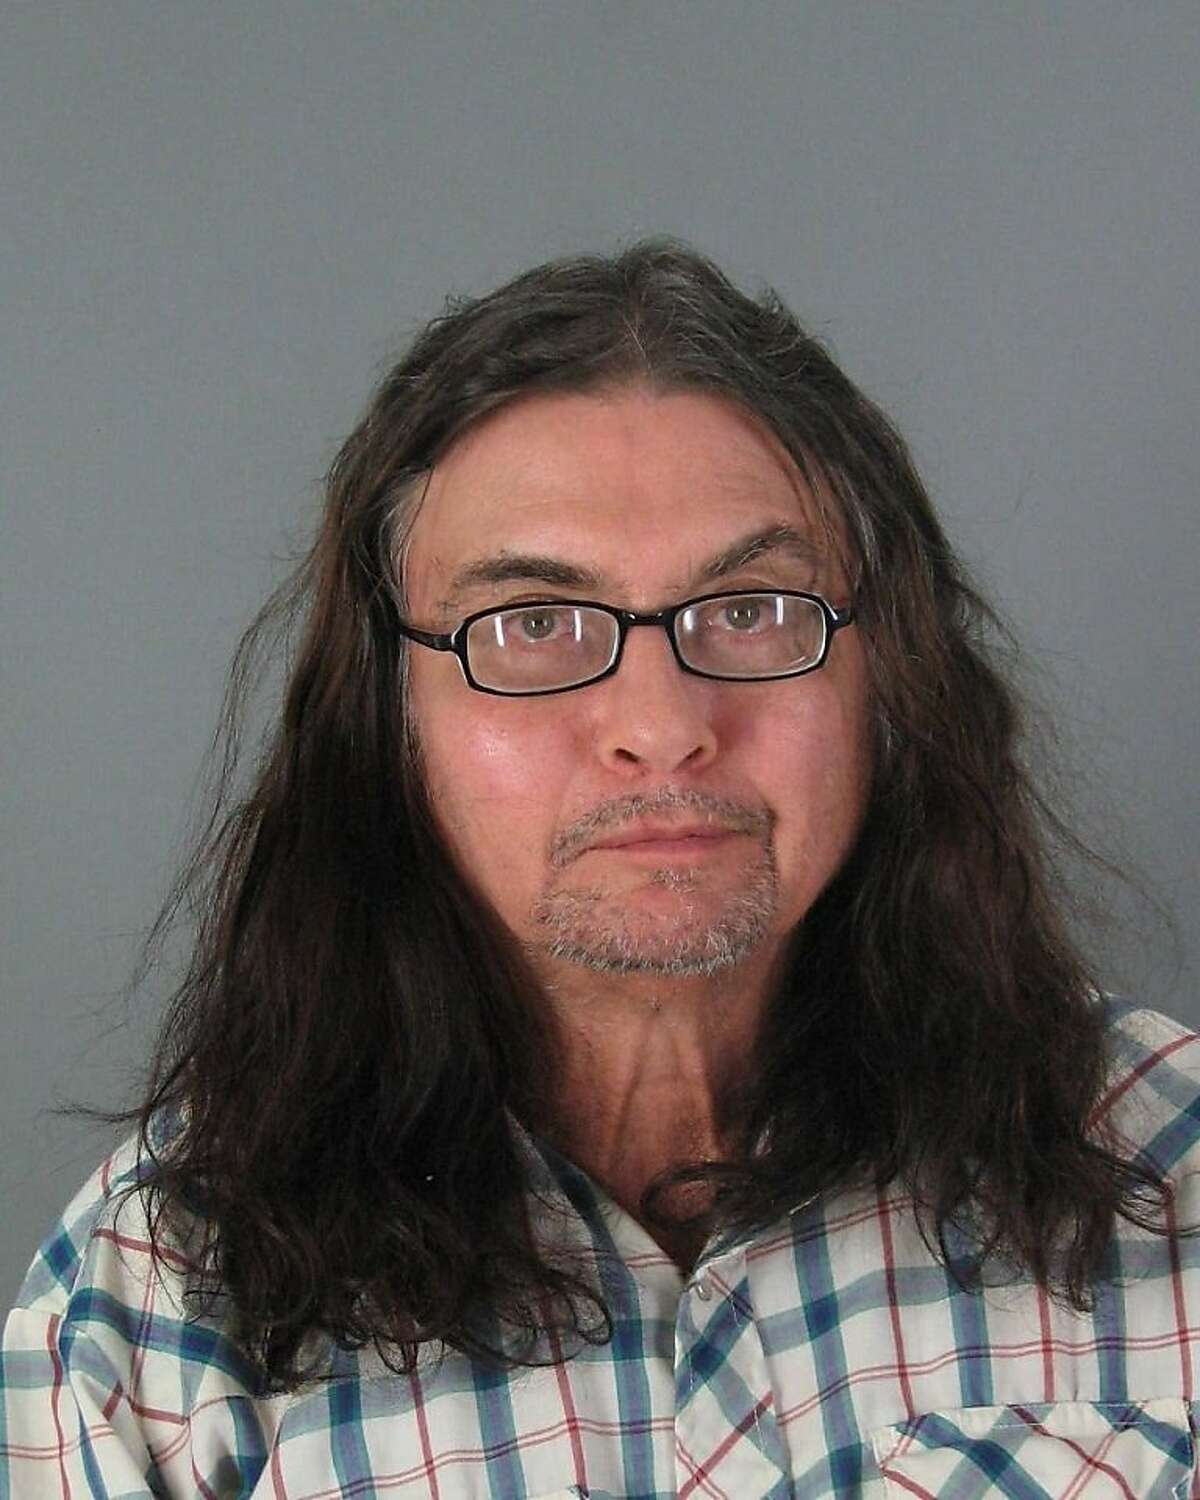 Samuel Kioskli, charged with swapping $200,000 in fake bills for real cash at ATMs in San Francisco and Daly City.